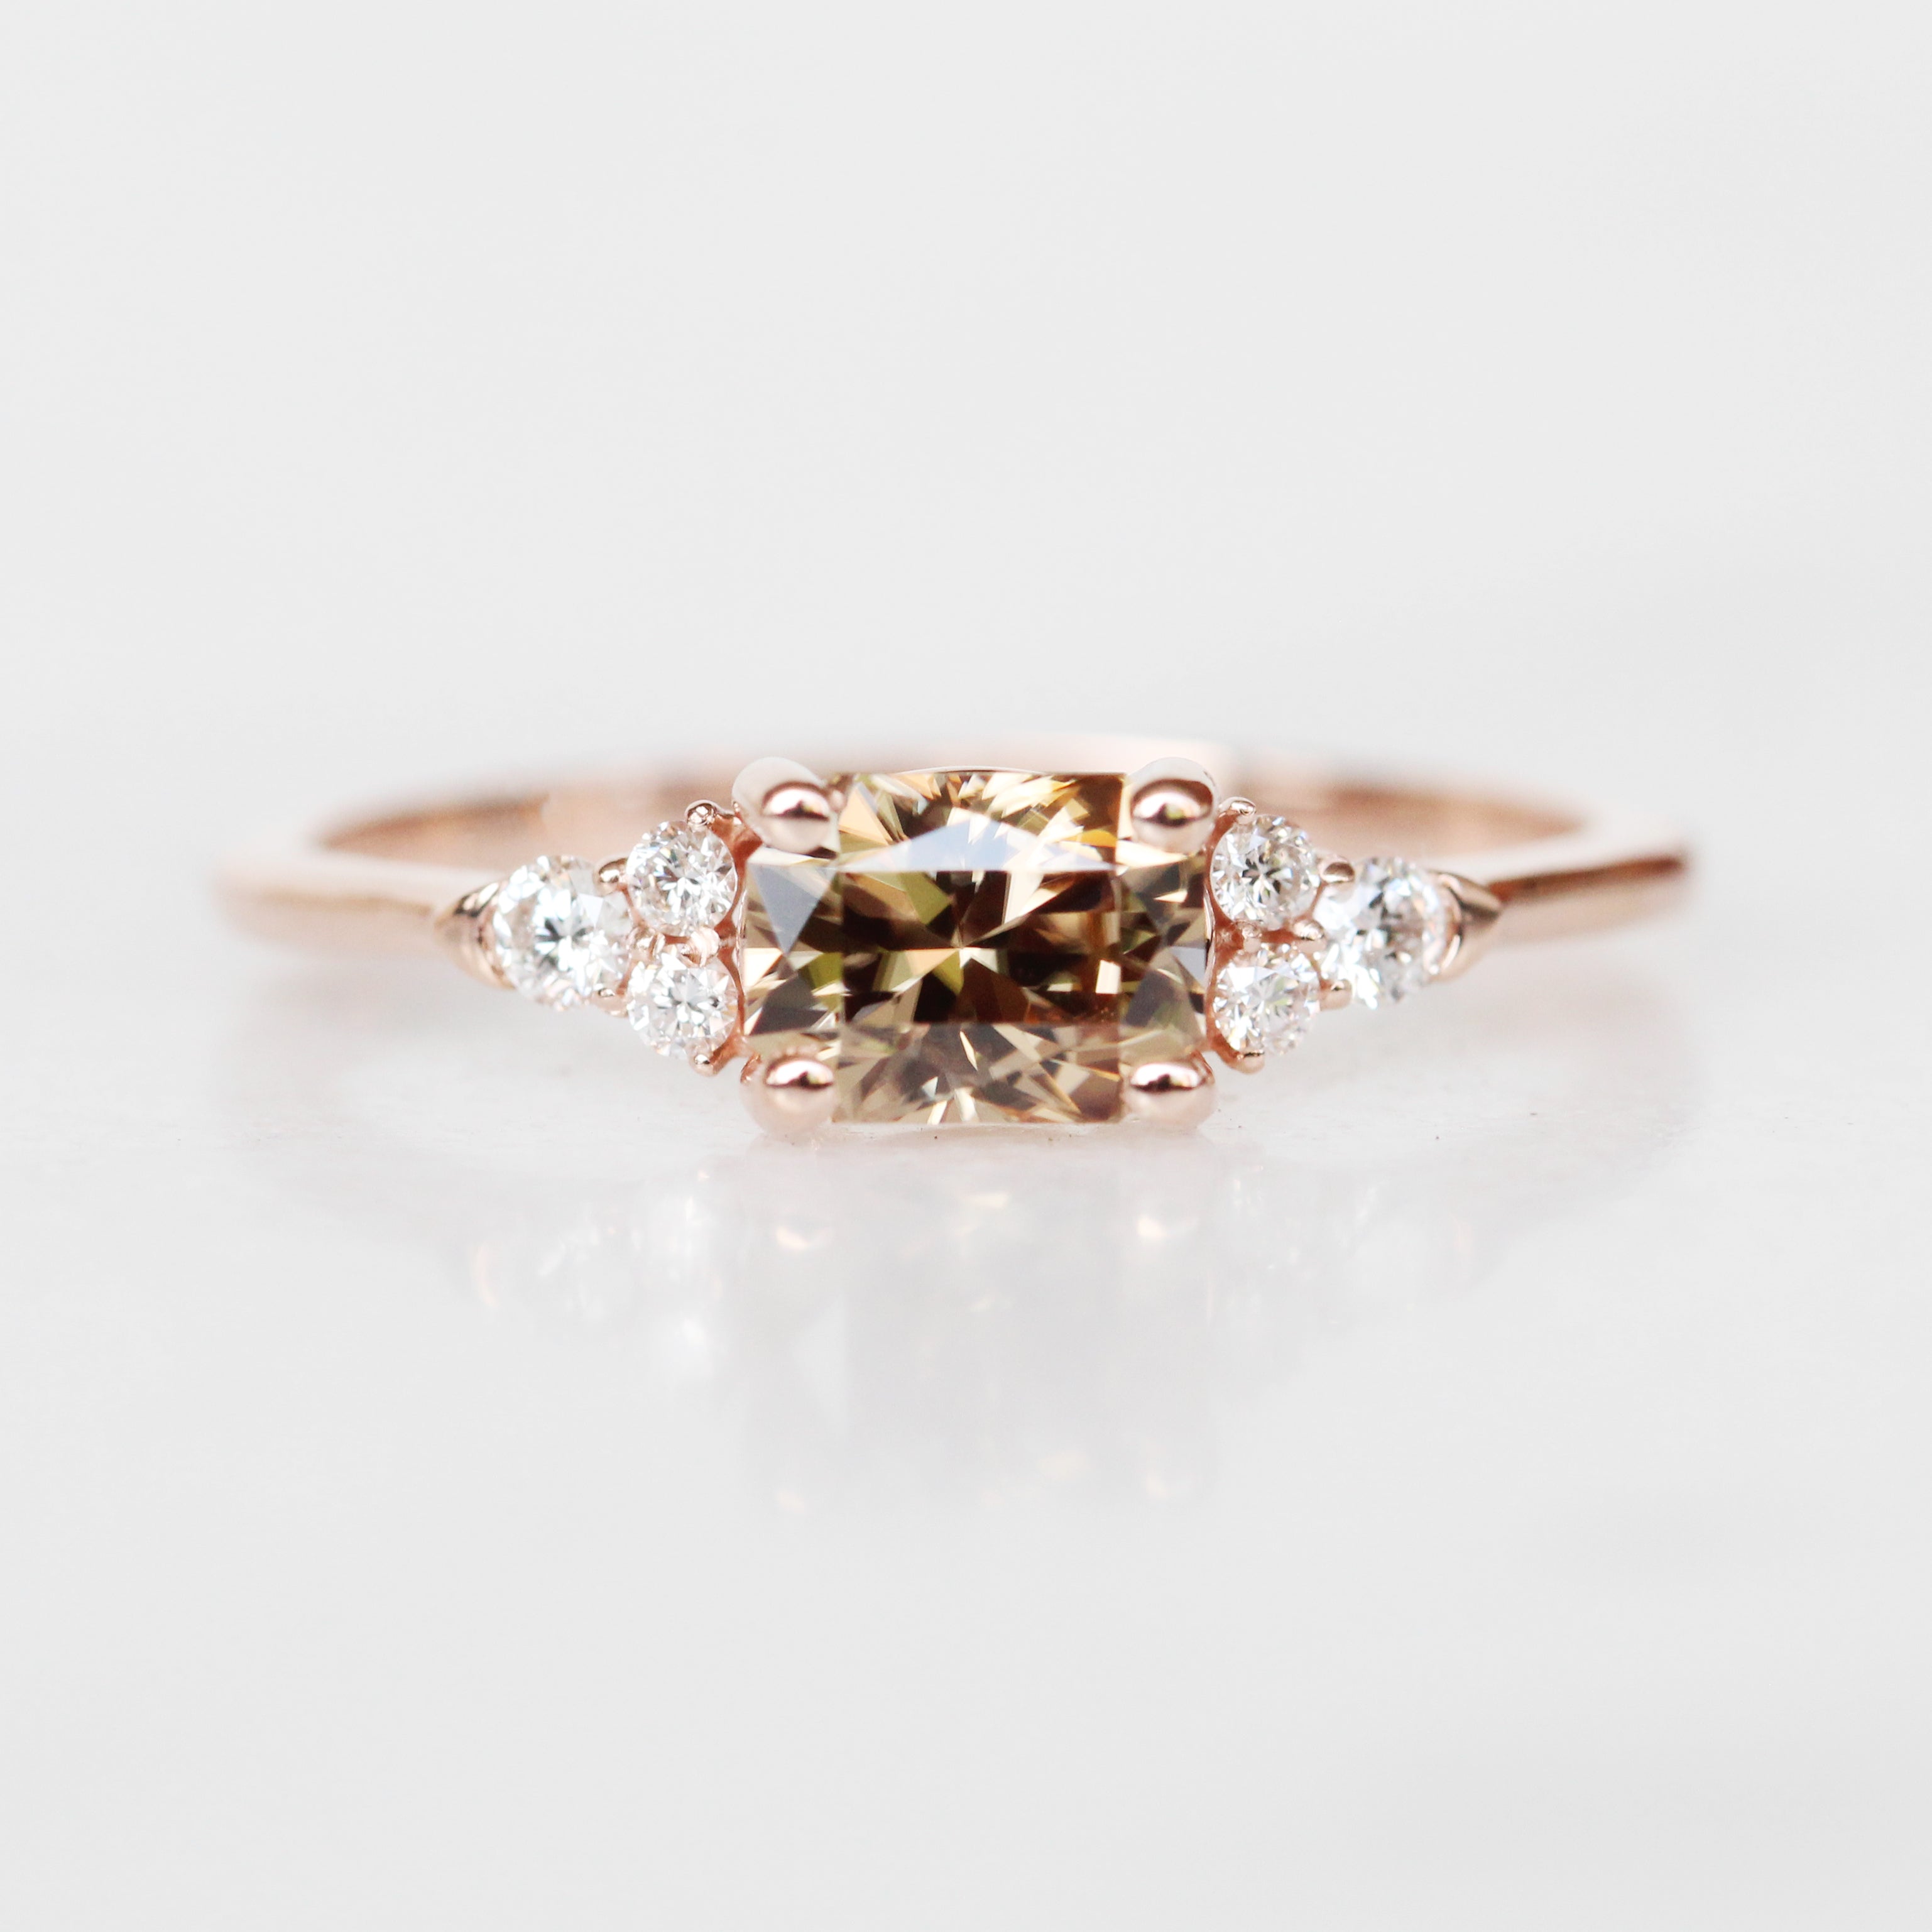 Cadence Ring with 1.13 ct Imperial Zircon and Diamonds in 10k Rose Gold - Ready to Size and Ship - Midwinter Co. Alternative Bridal Rings and Modern Fine Jewelry